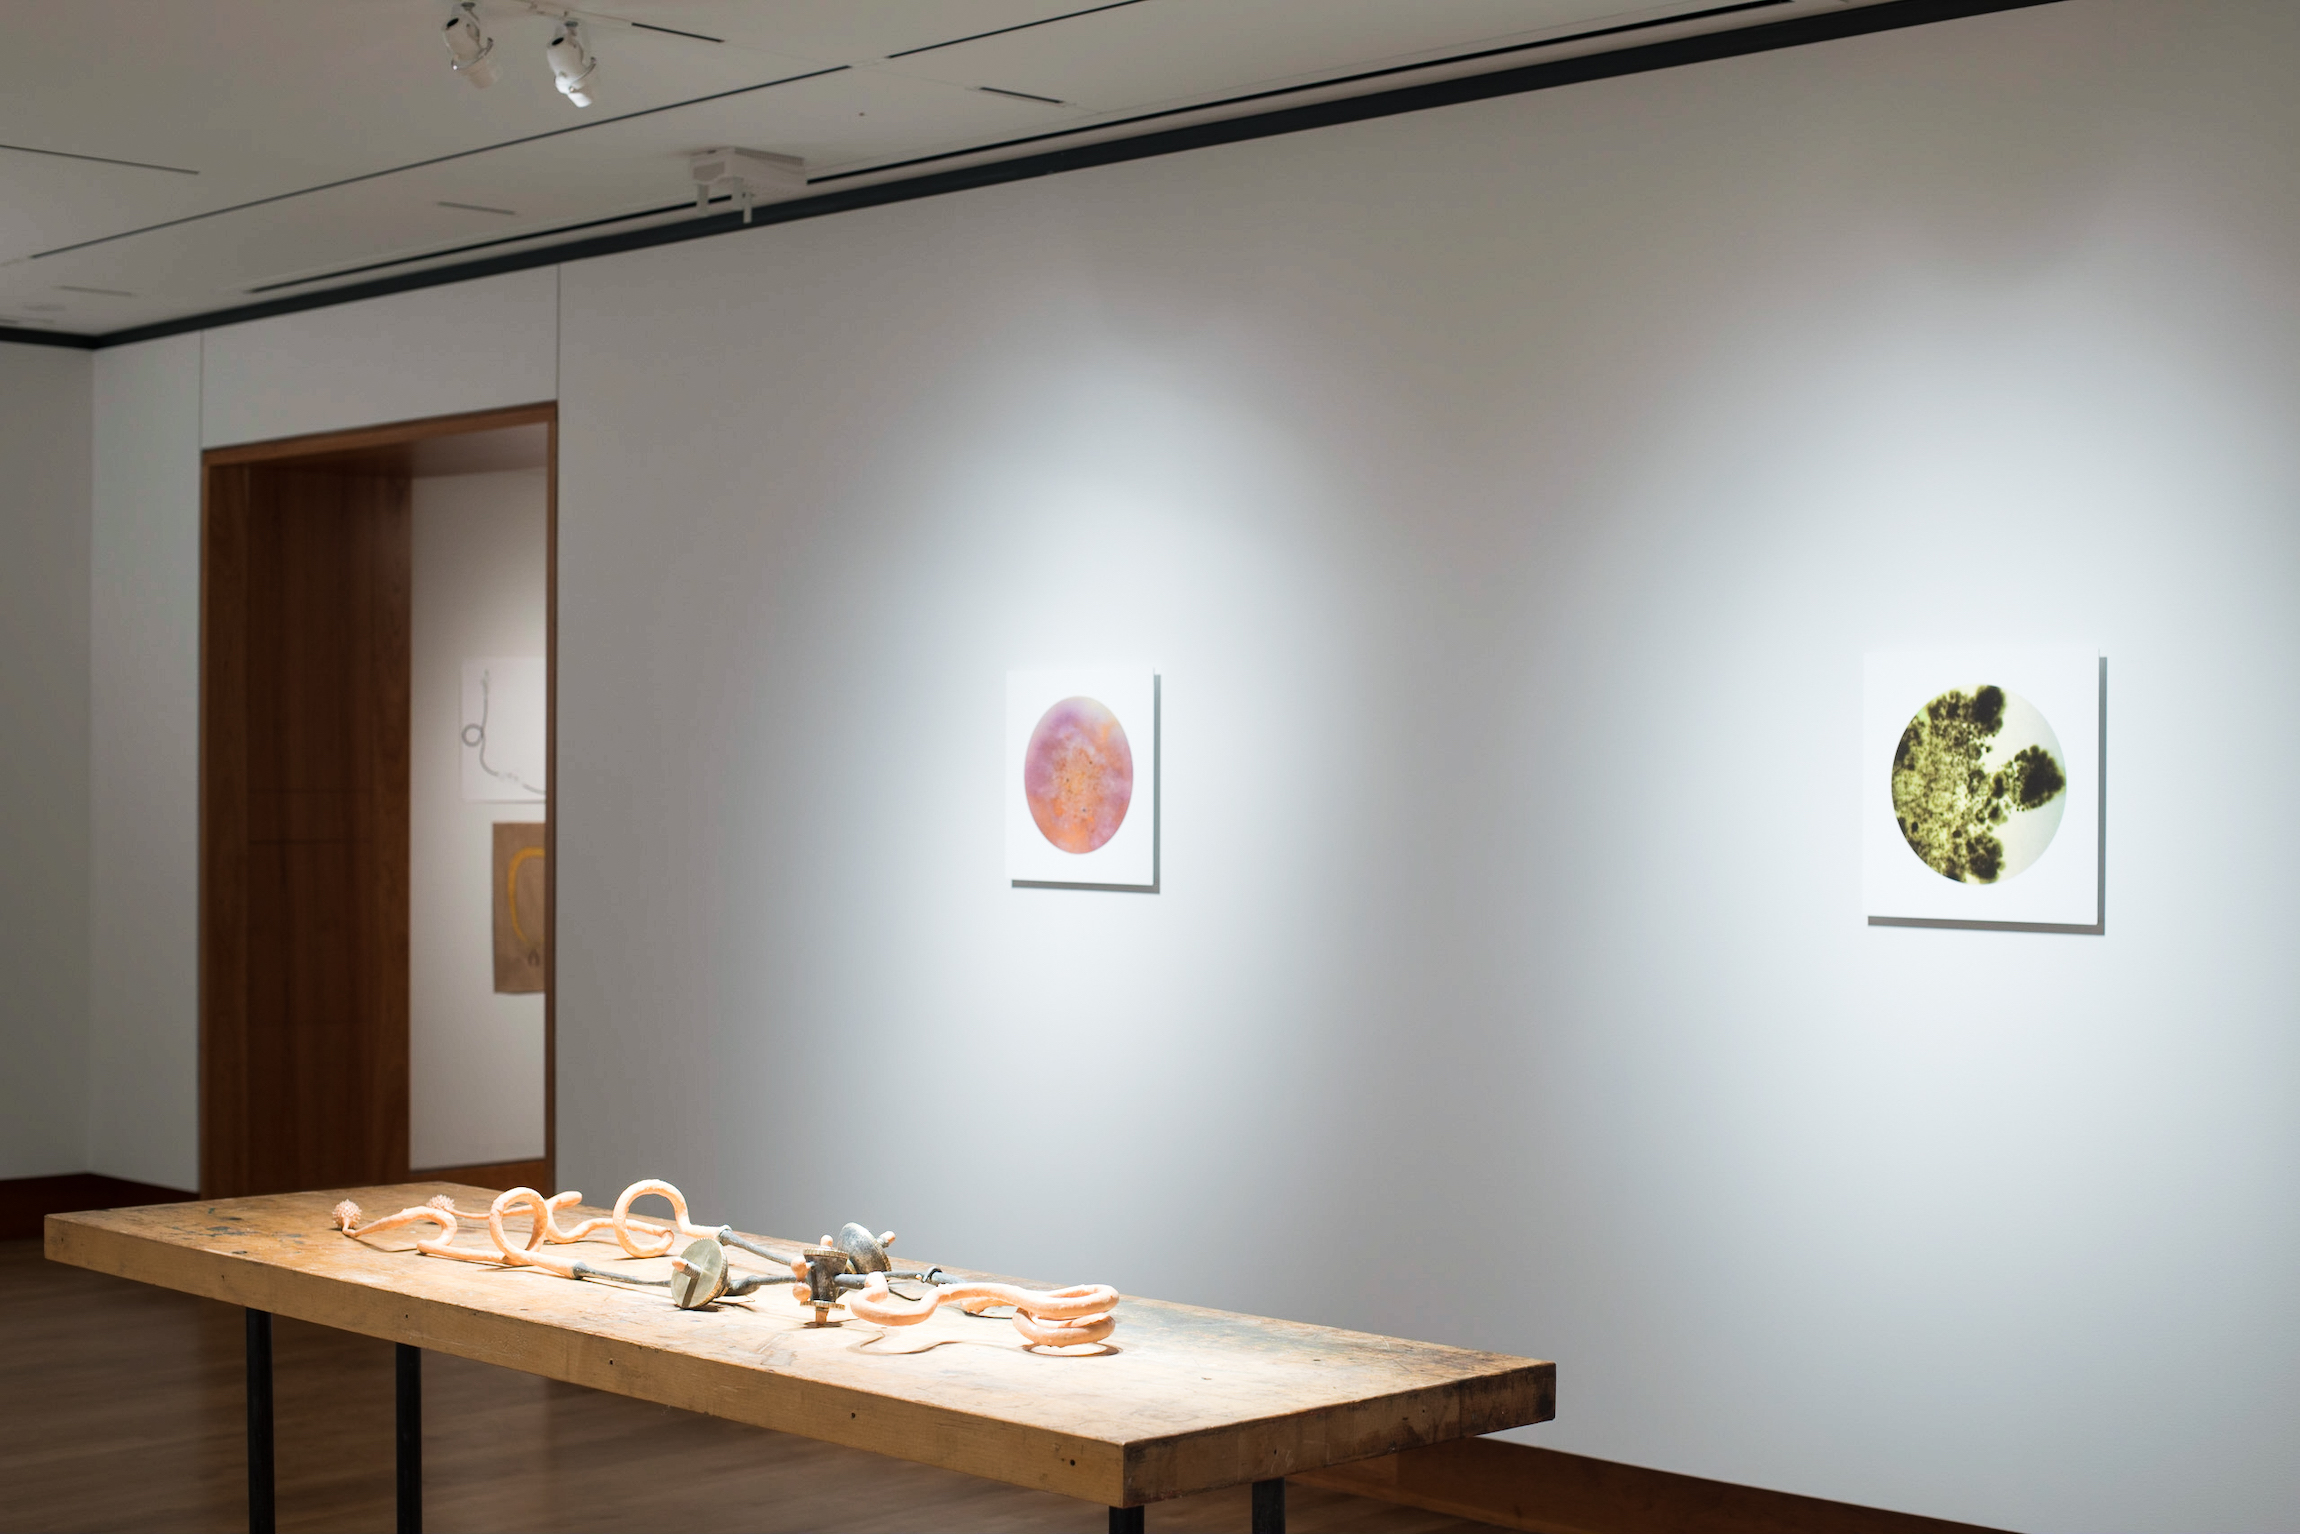 Installation view of Chloe Darke's Master of Fine Arts exhibition Secrete, Augment, Testify at the Chazen Museum of Art, University of Wisconsin-Madison. Photography by Kyle Herrera.